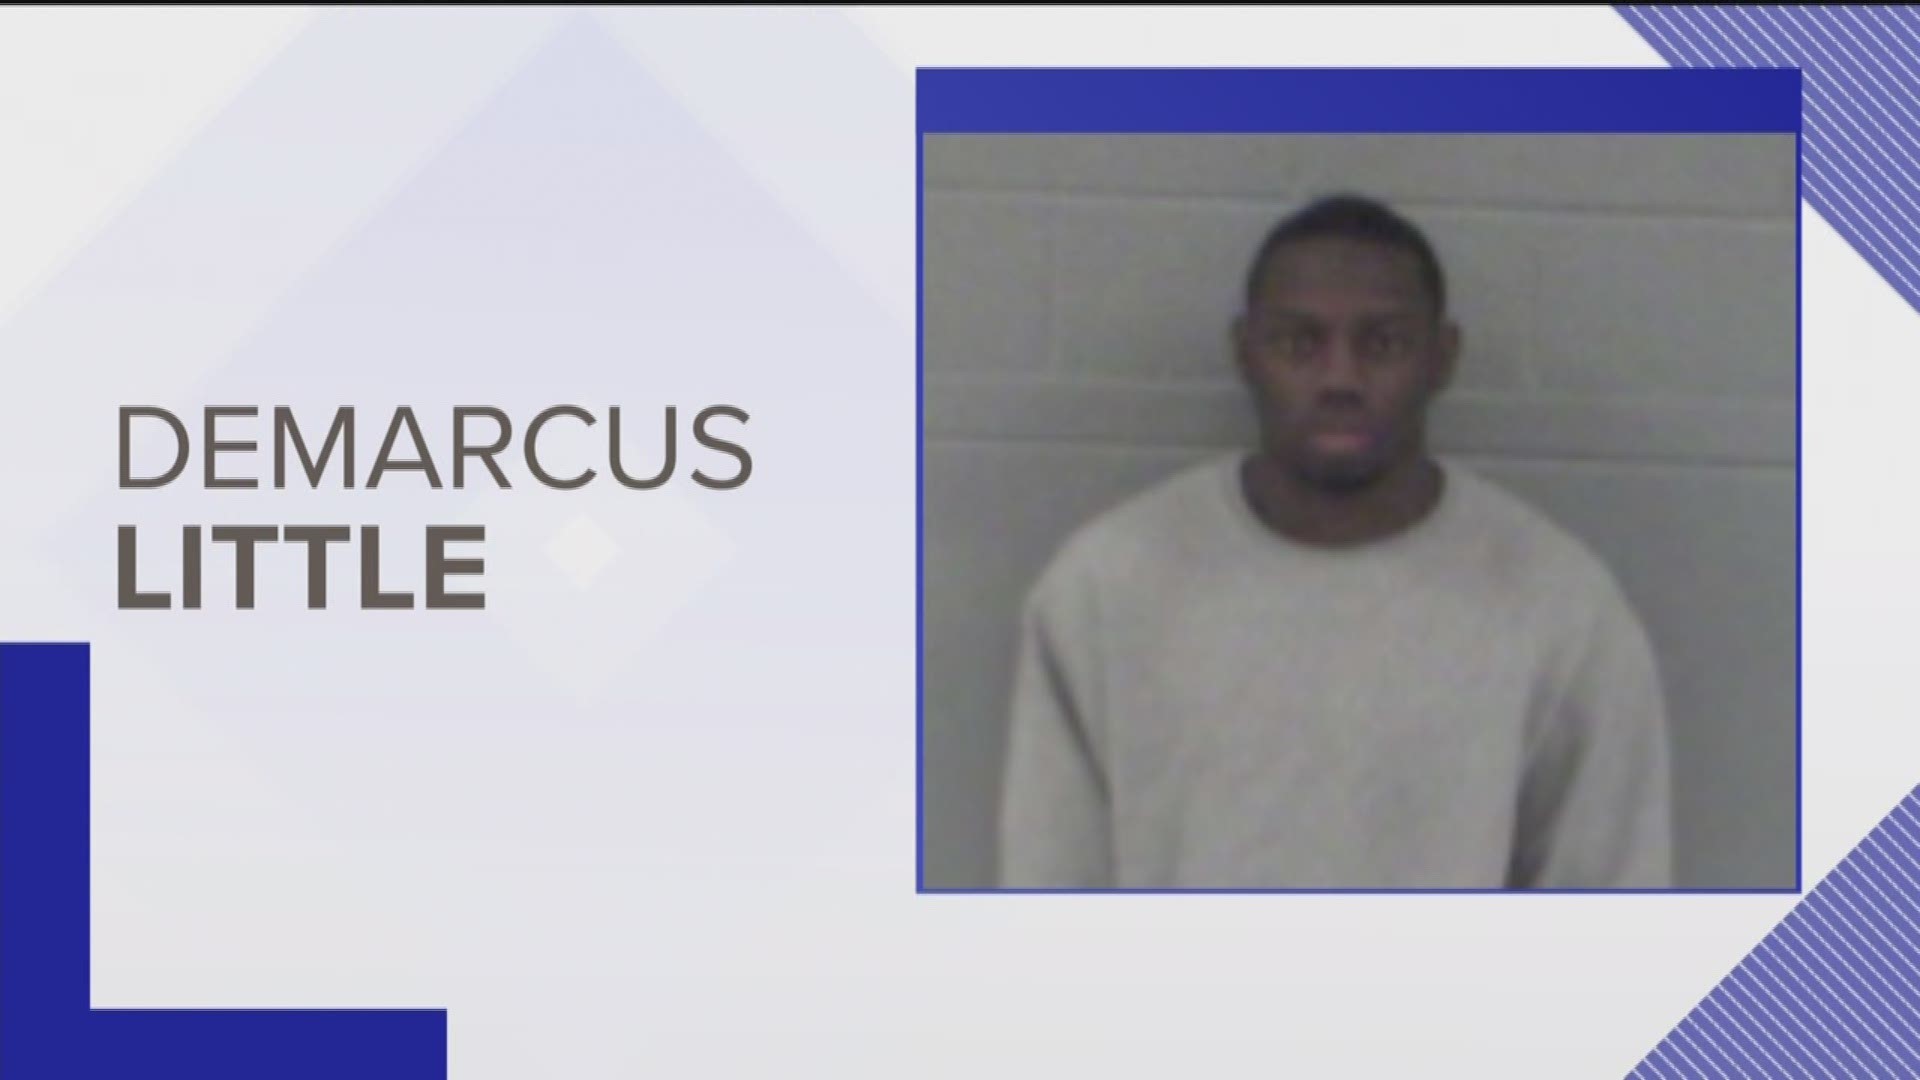 22-year-old DeMarcus Little was arrested for an incident that happened on February 5. Police say Little broke windows at Gunn's apartment and slashed her tires.